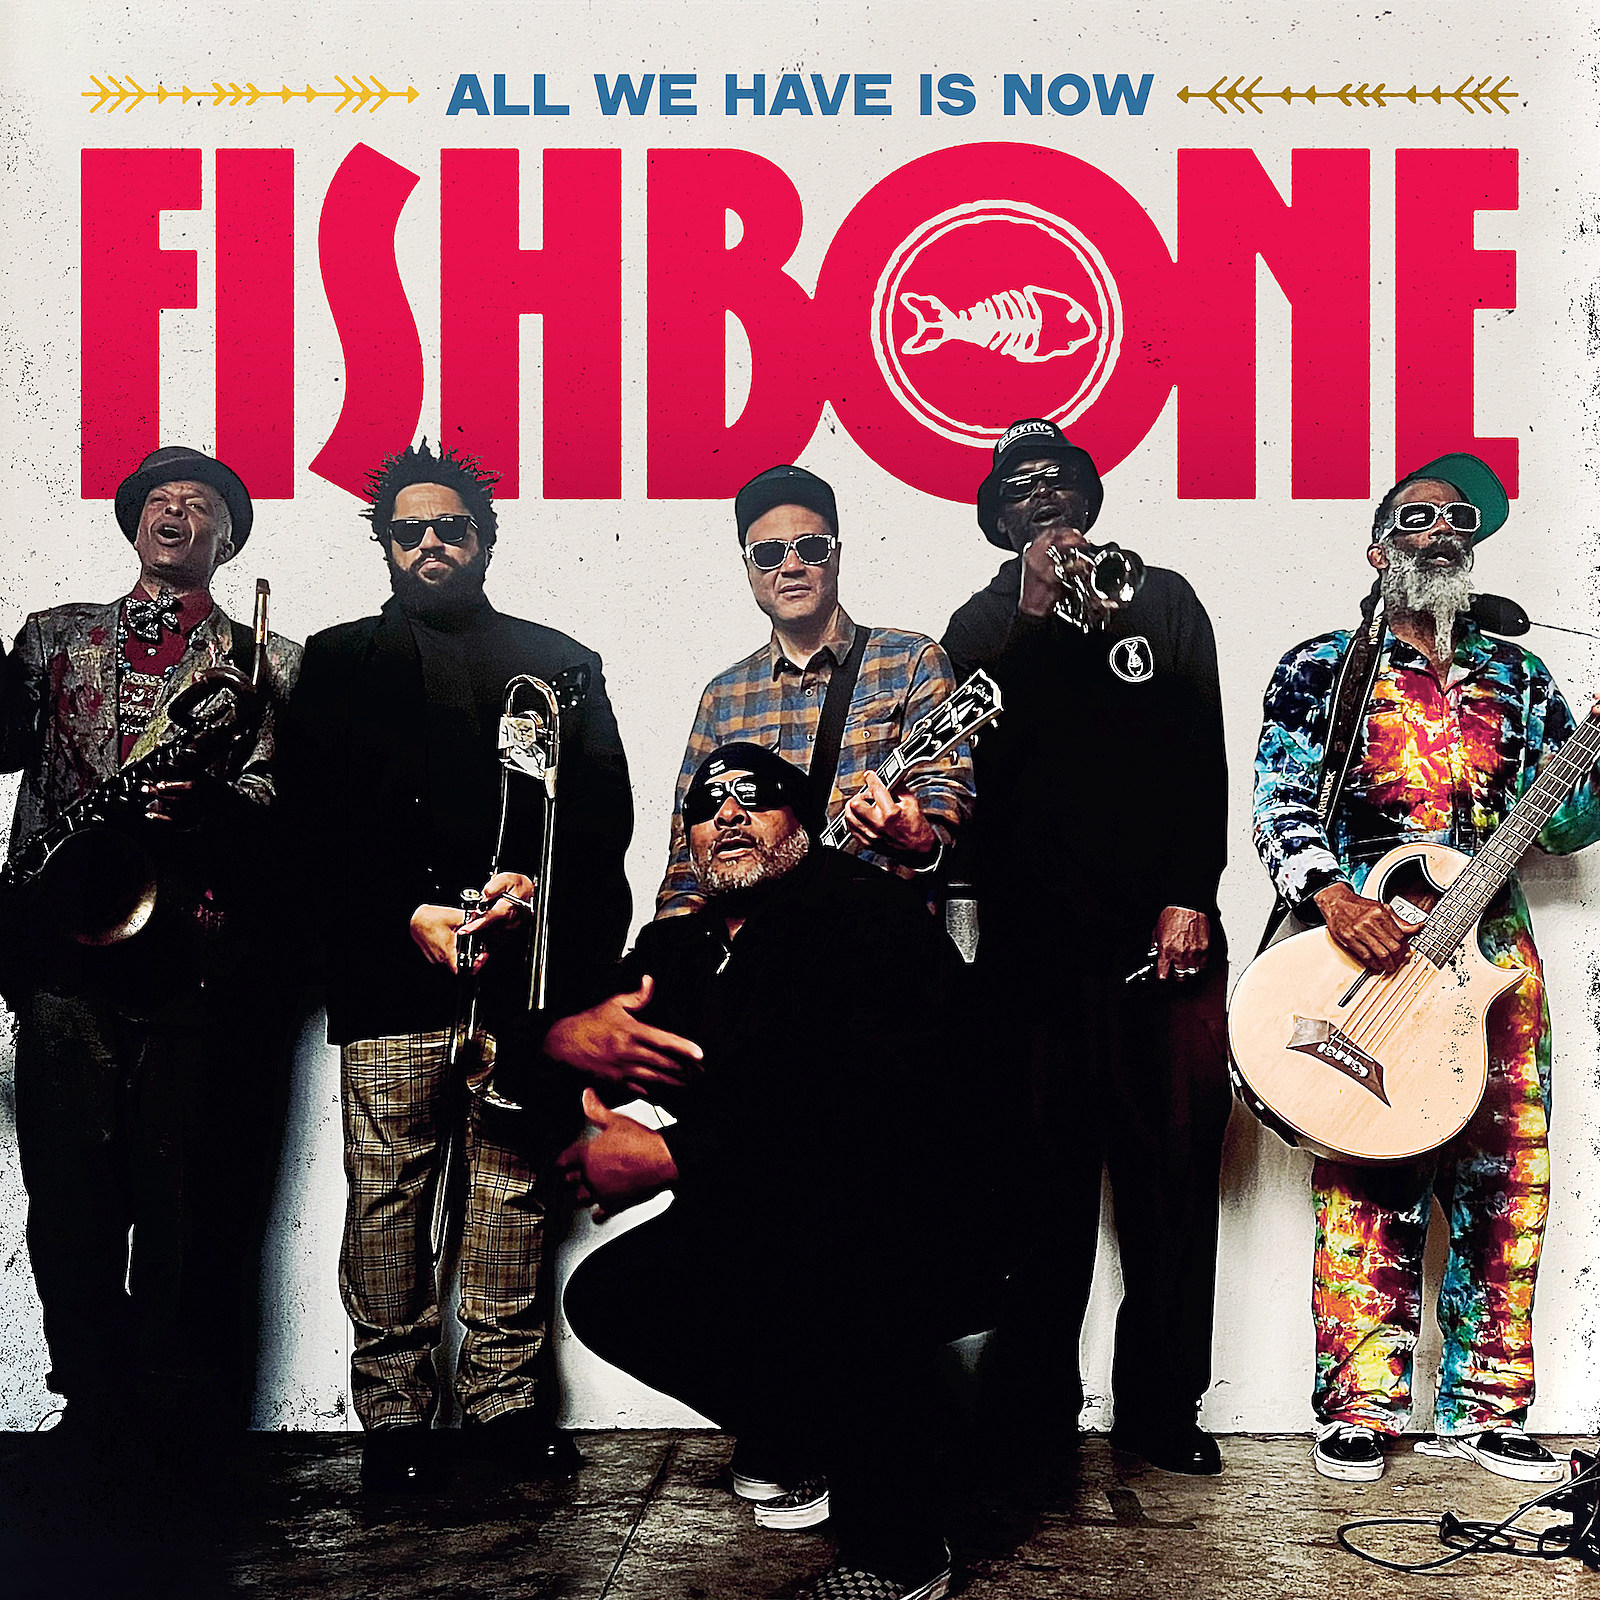 Rock The Body Electric New Single from Fishbone "All We Have Is Now"